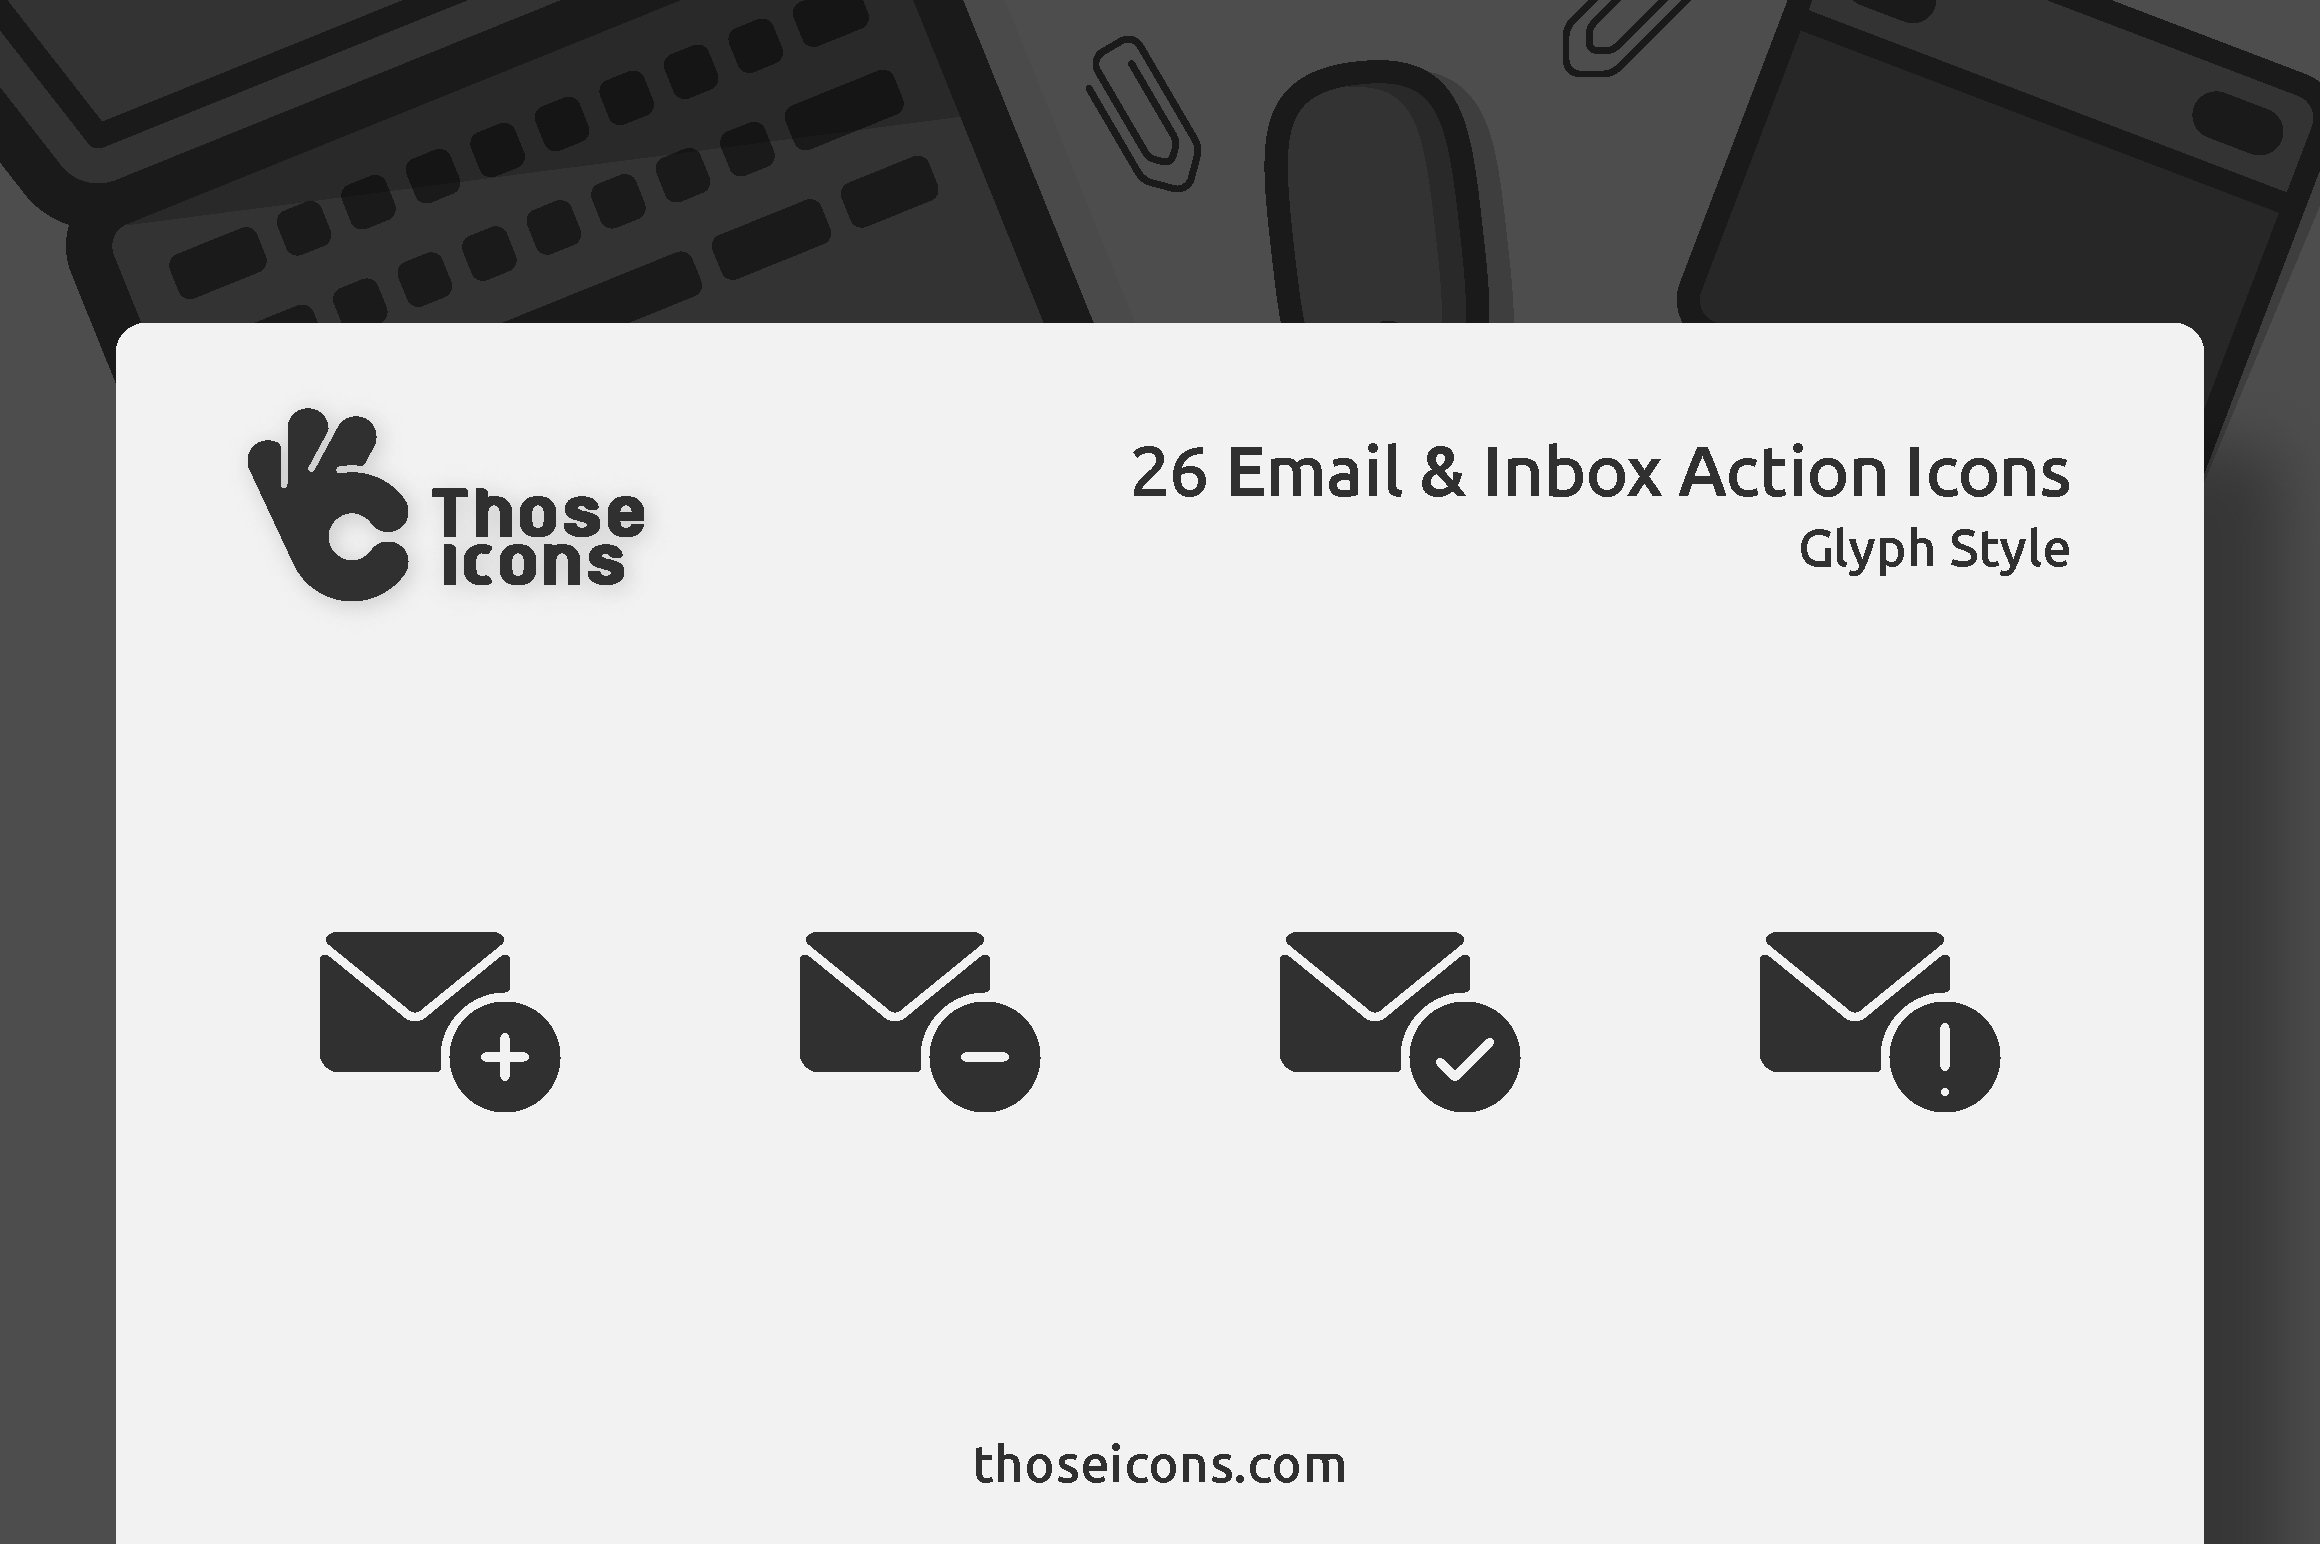 Email & Inbox Actions Glyph Icons cover image.